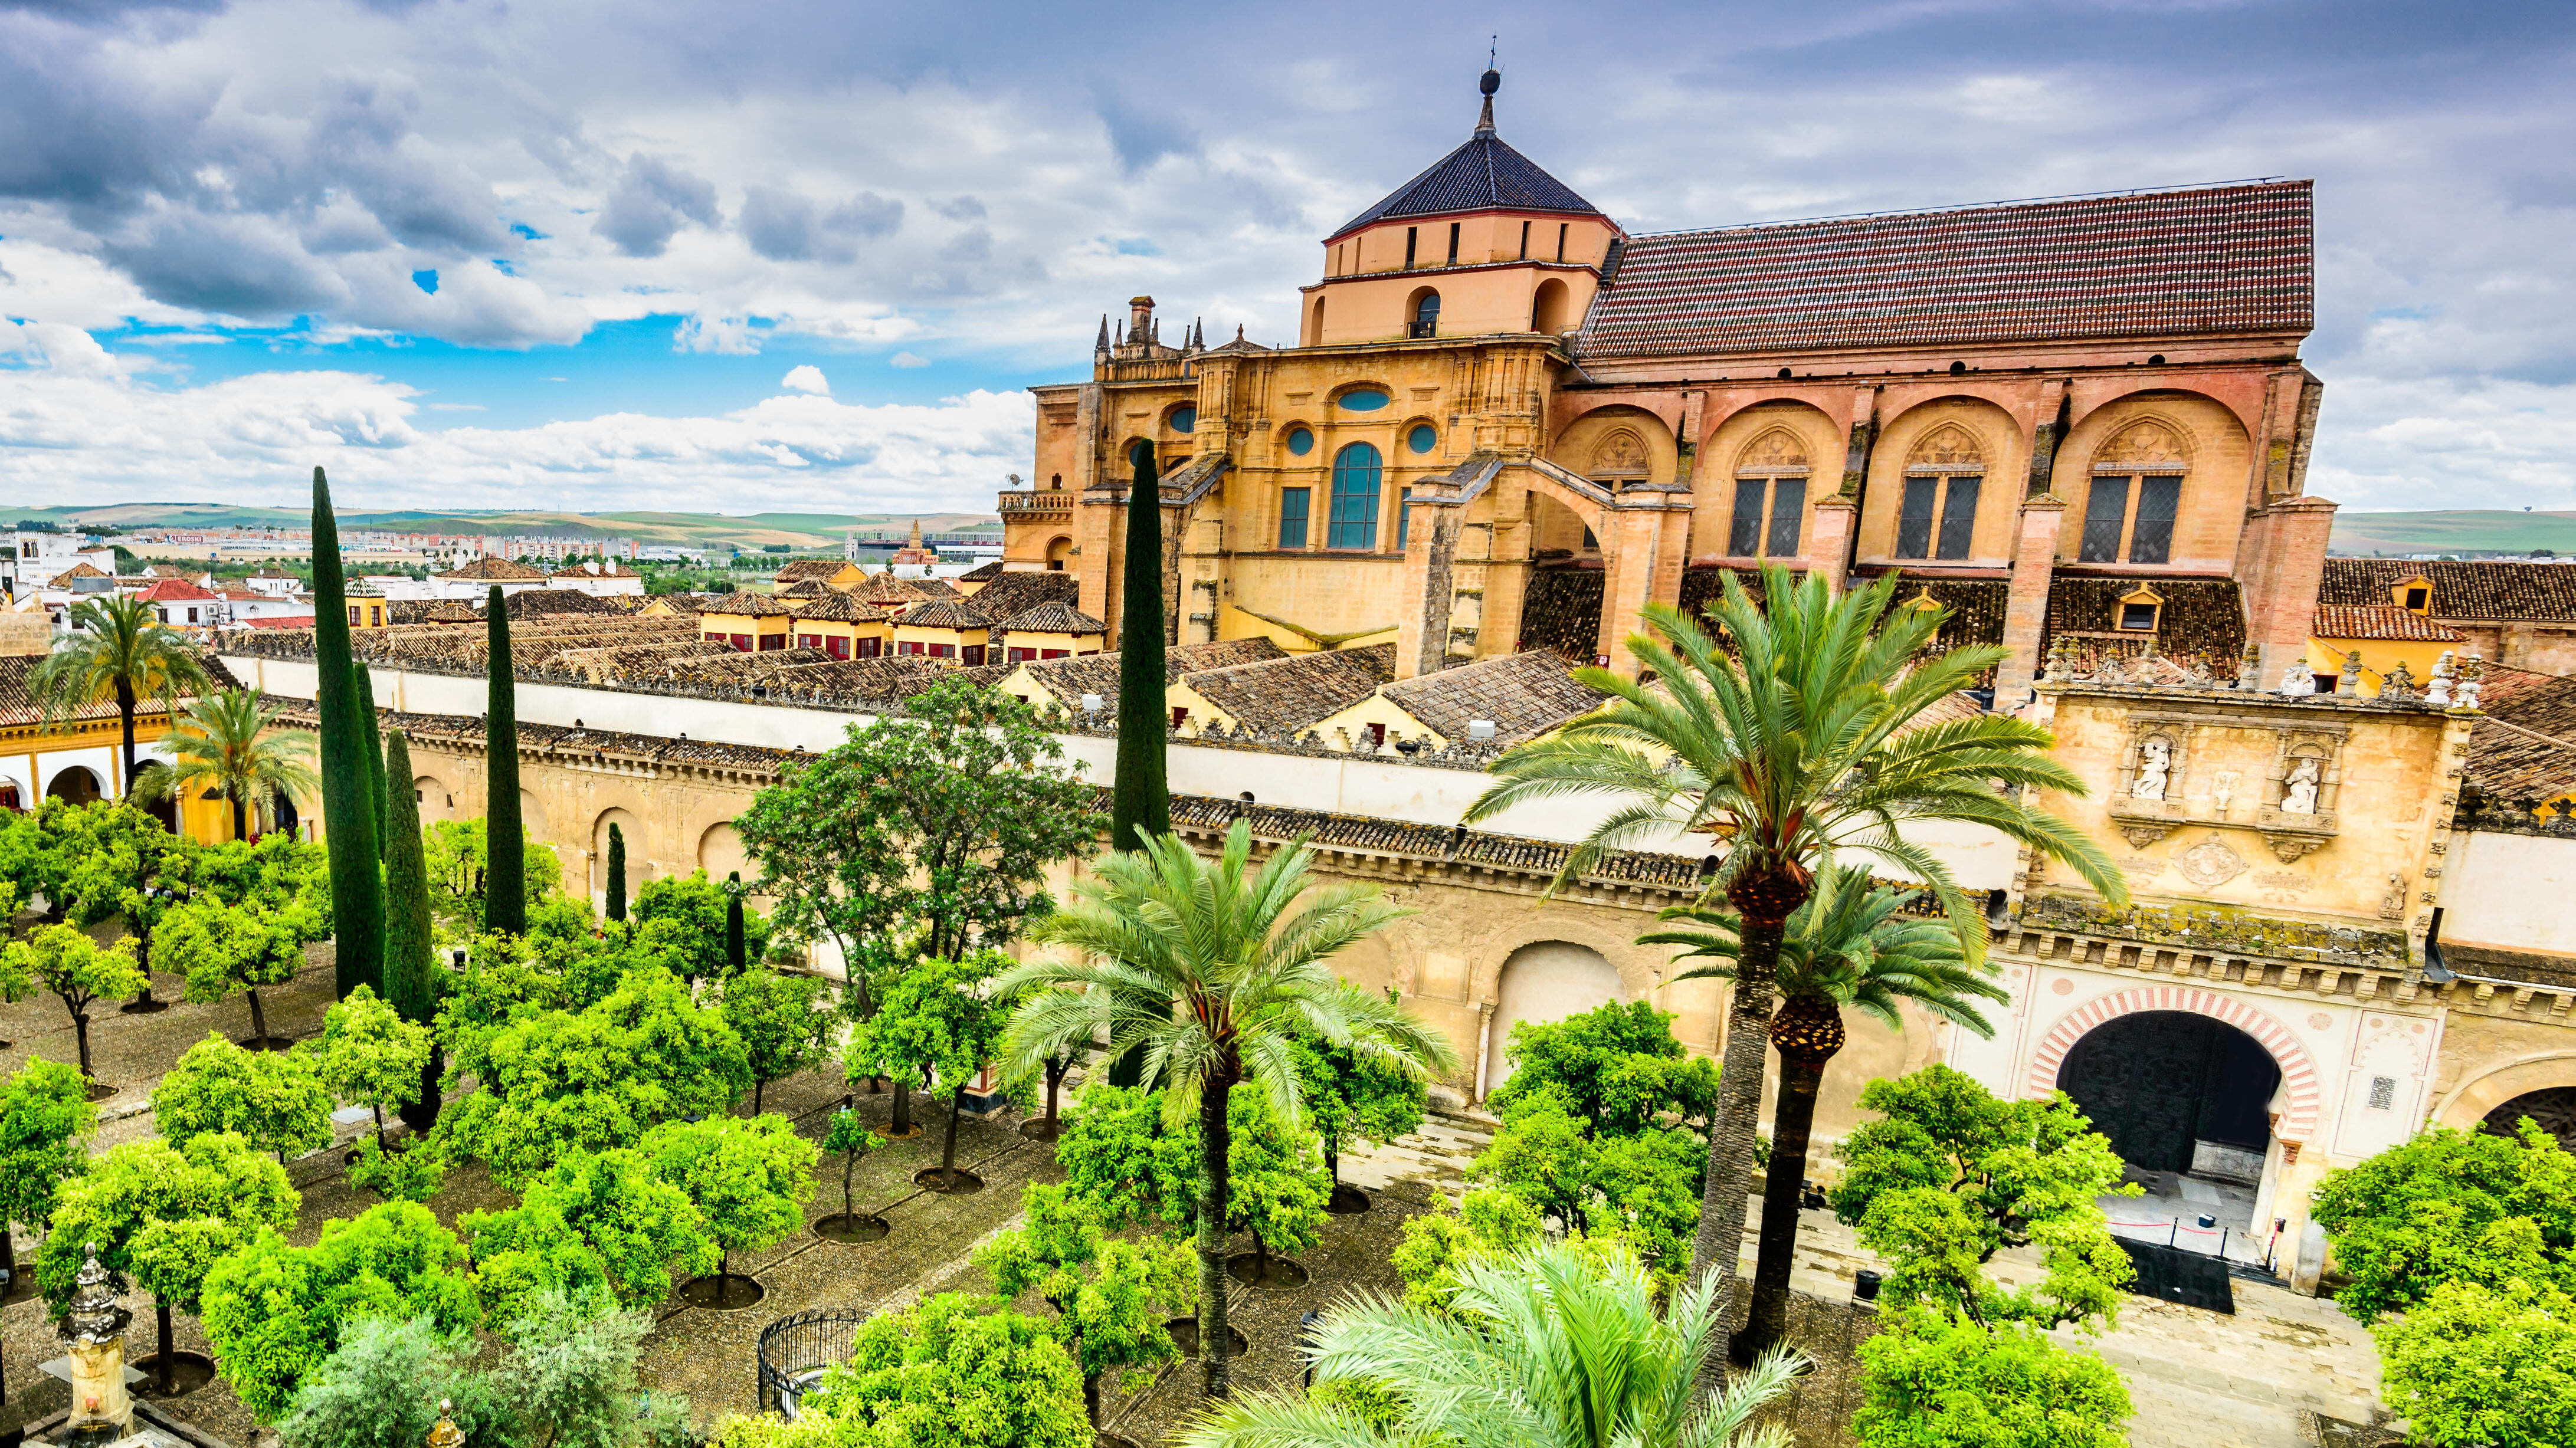 Plan a visit to the Mosque-Cathedral of Córdoba, a religious monument of Islamic world